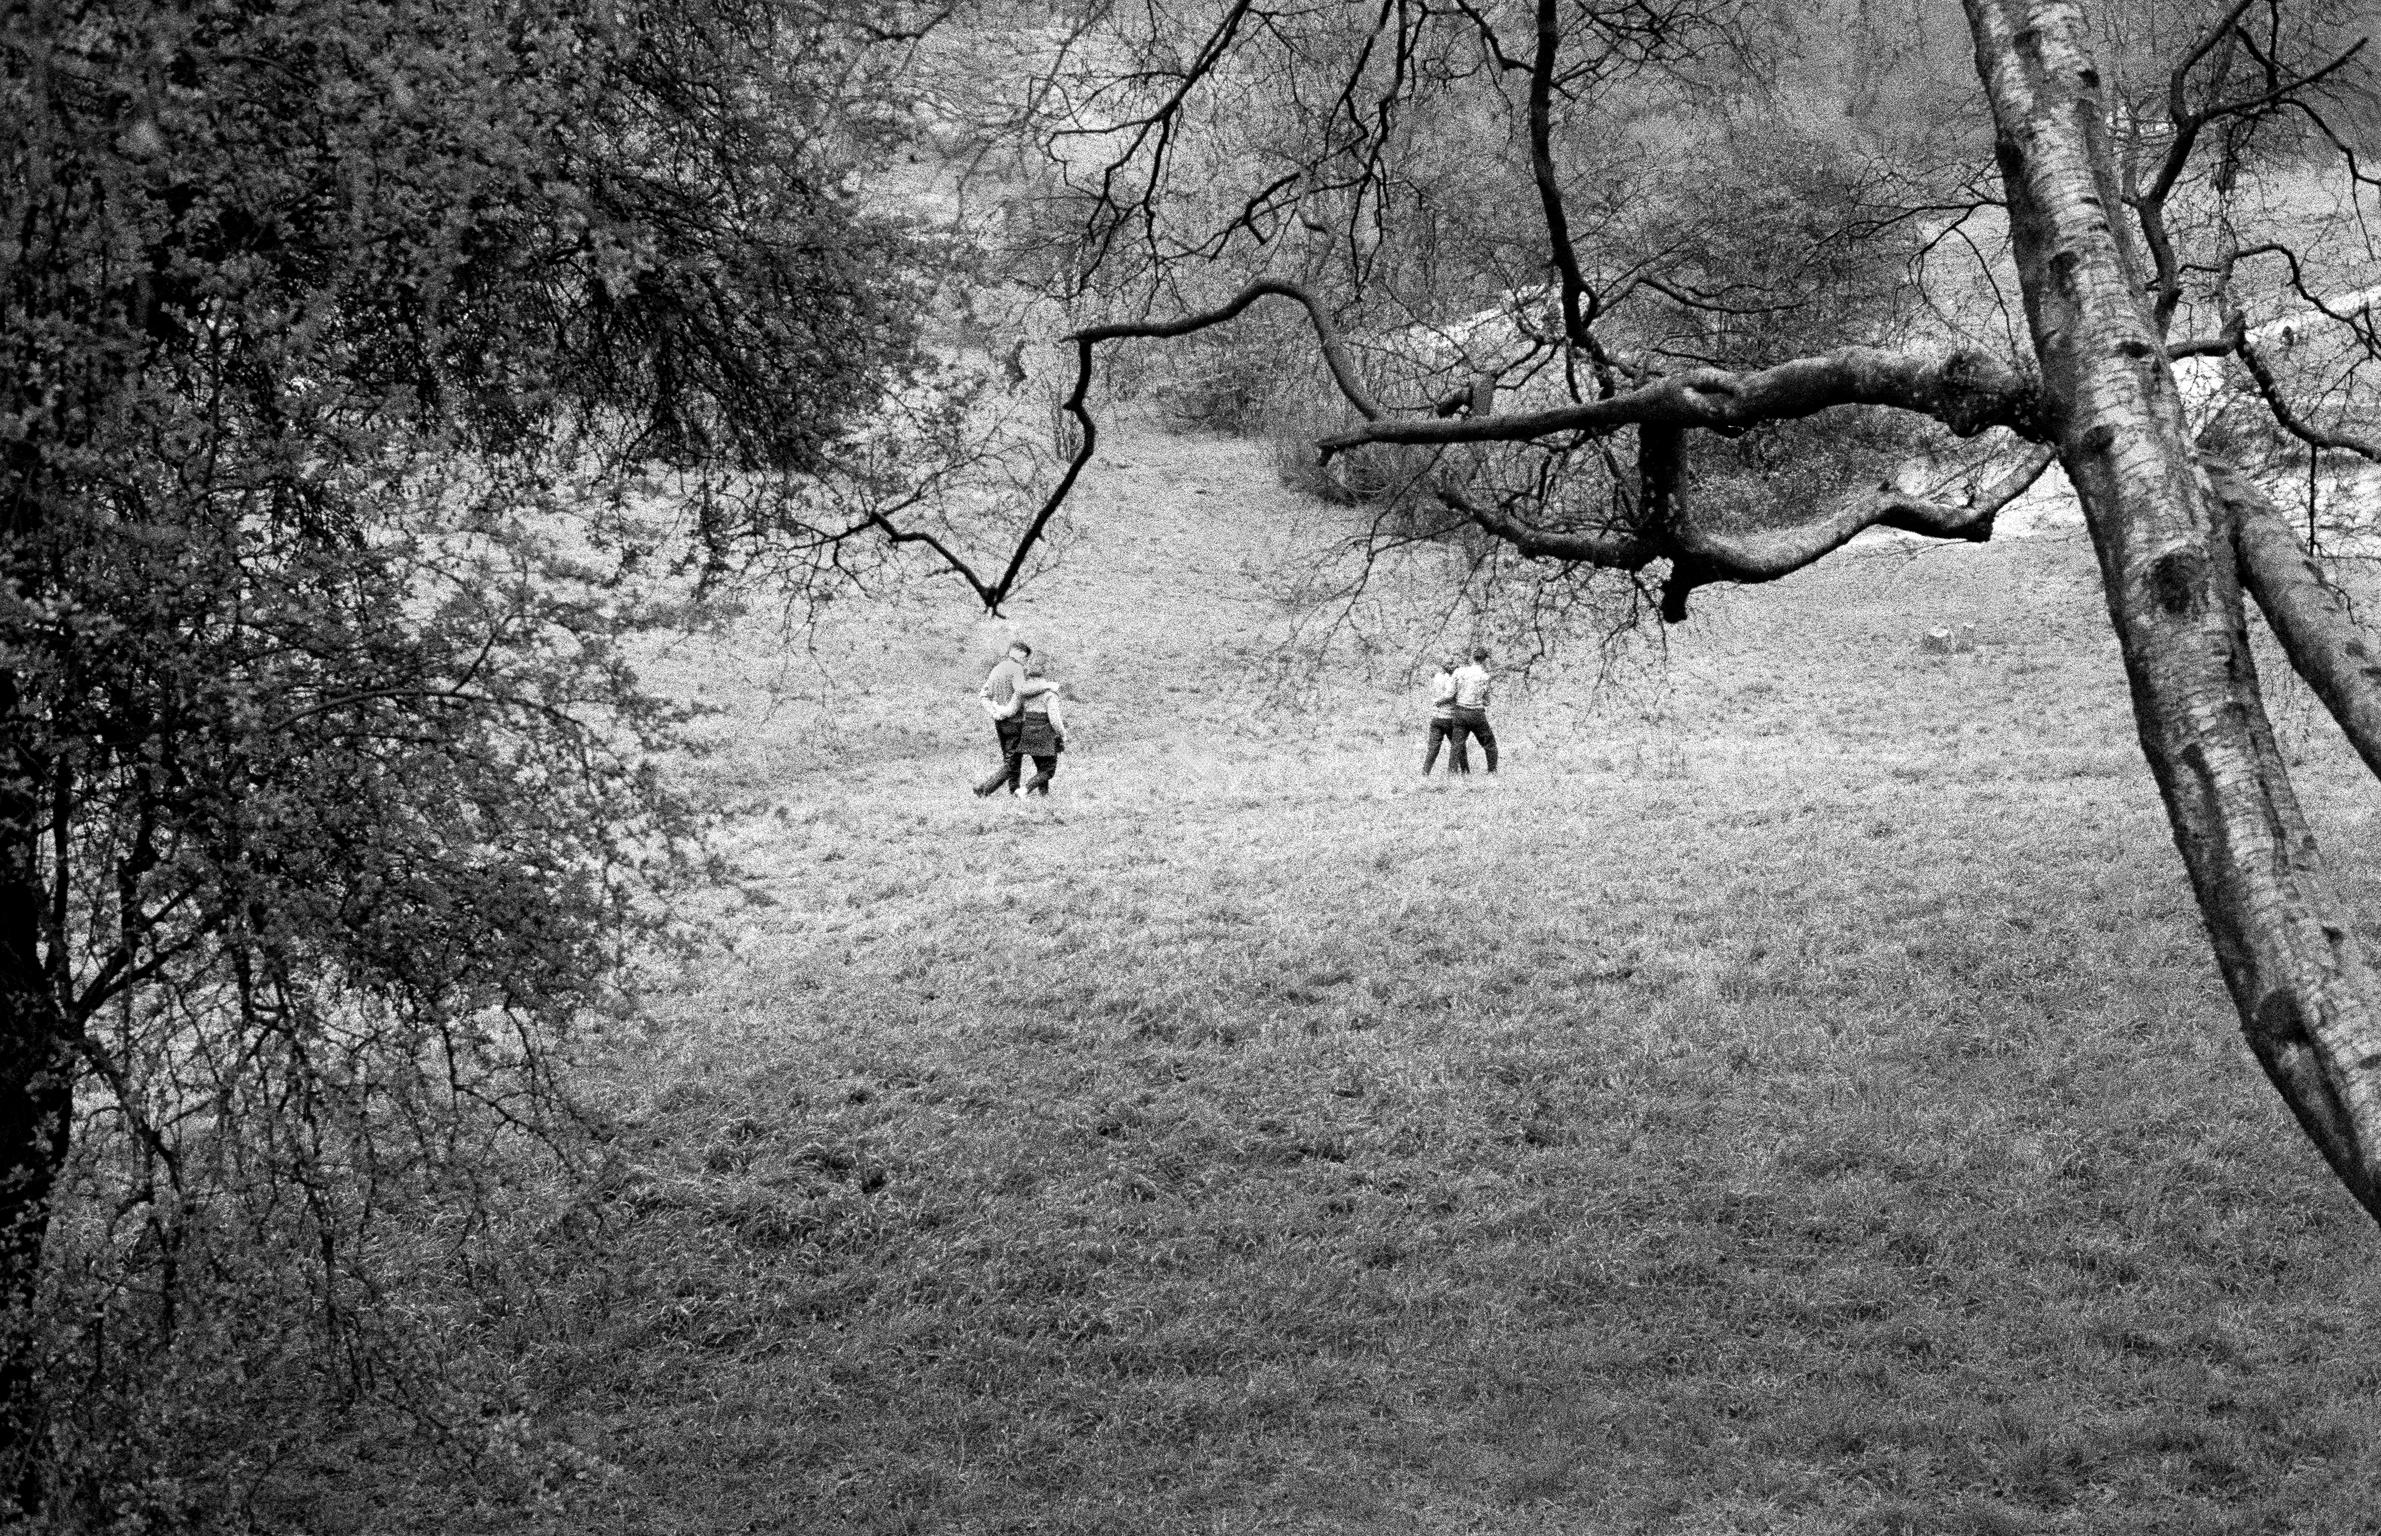 Hampstead Heath in North London. A favourite walking spot for young lovers. Taken on a Contax 2 camera (first professional camera)